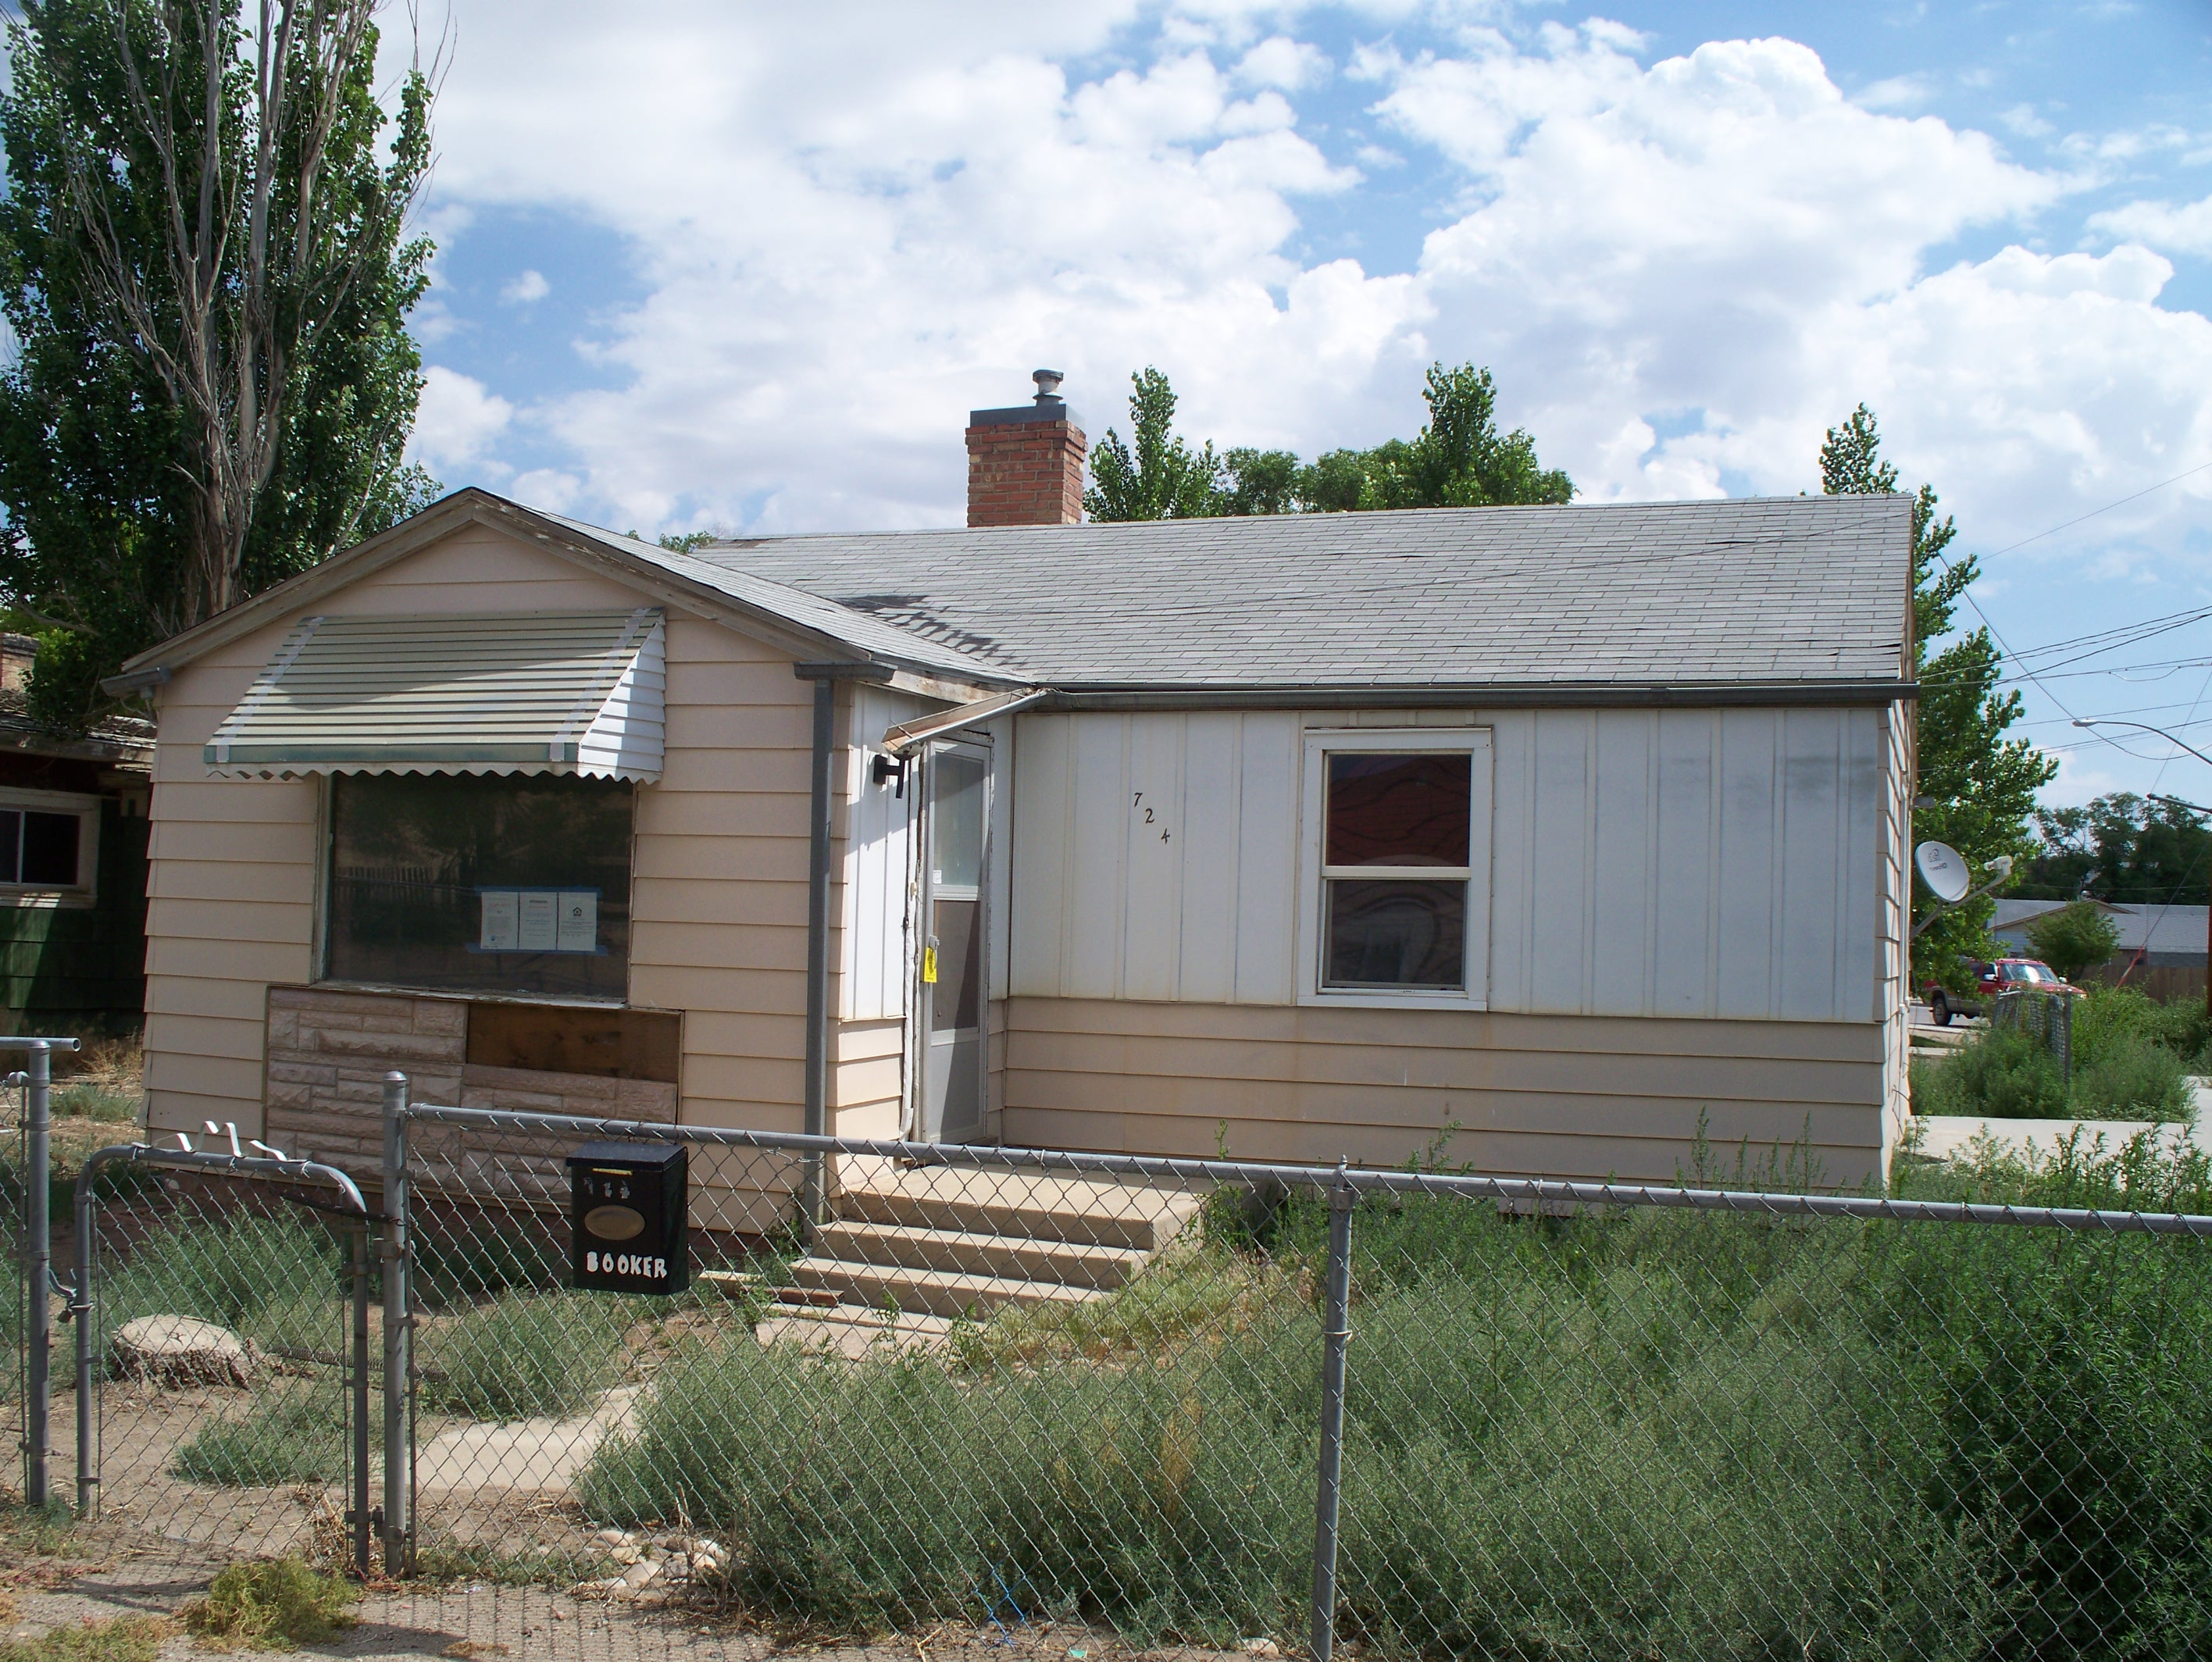  724 Booker St, Rock Springs, WY photo